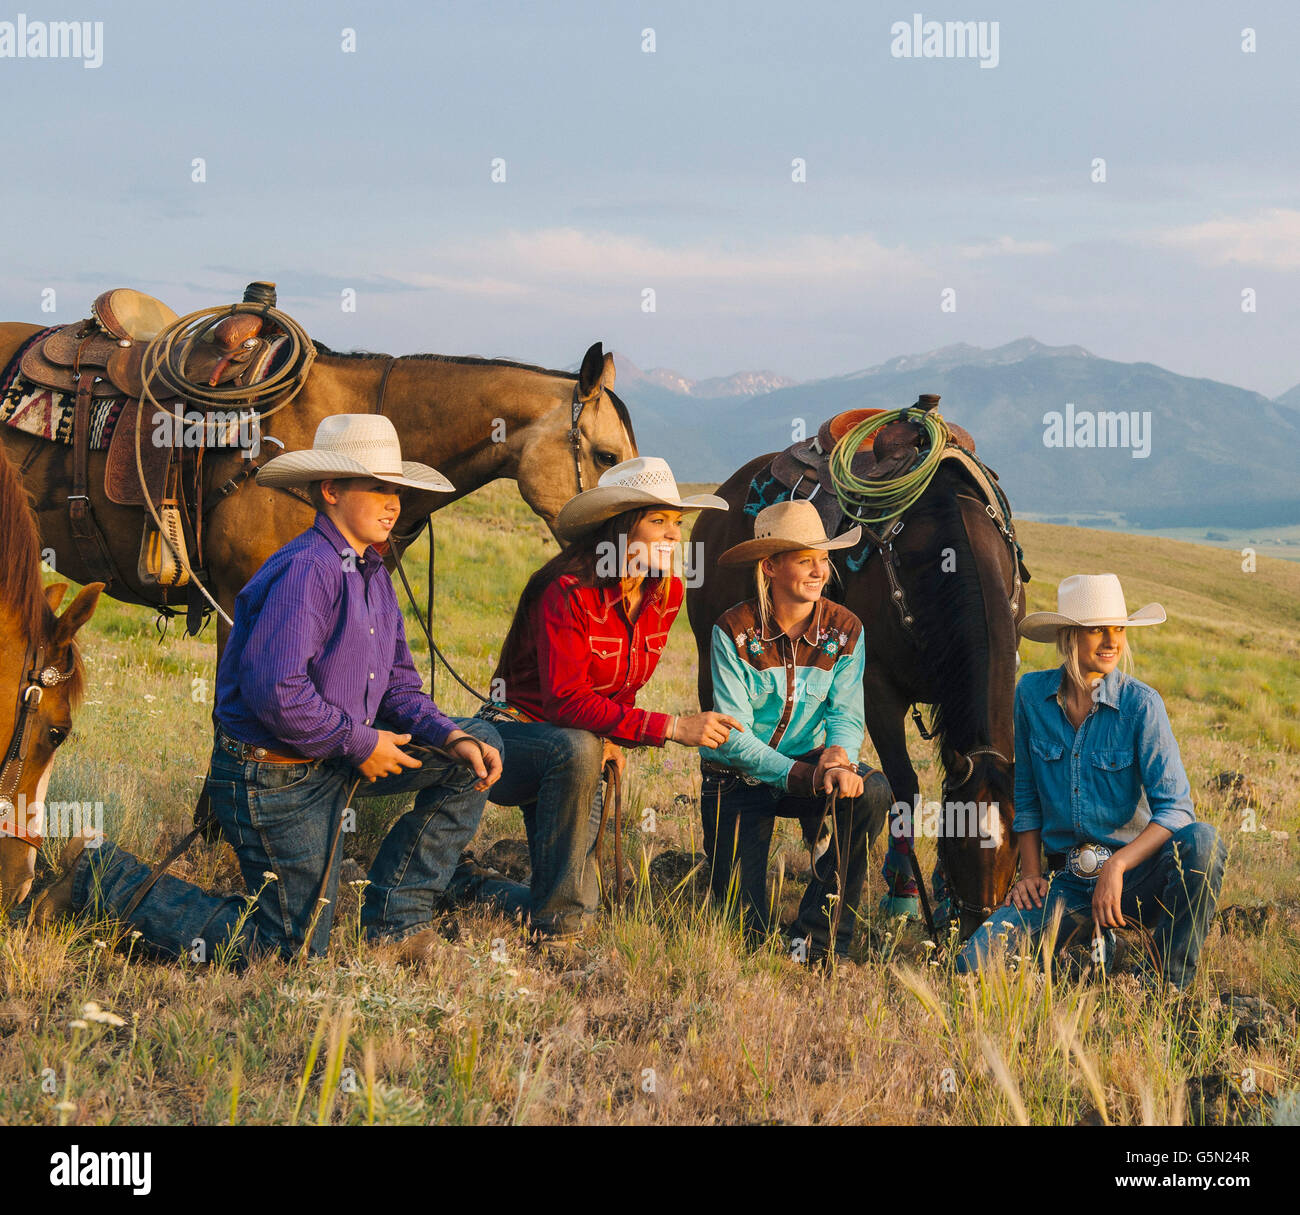 Cowboy and cowgirls with horses on ranch Stock Photo